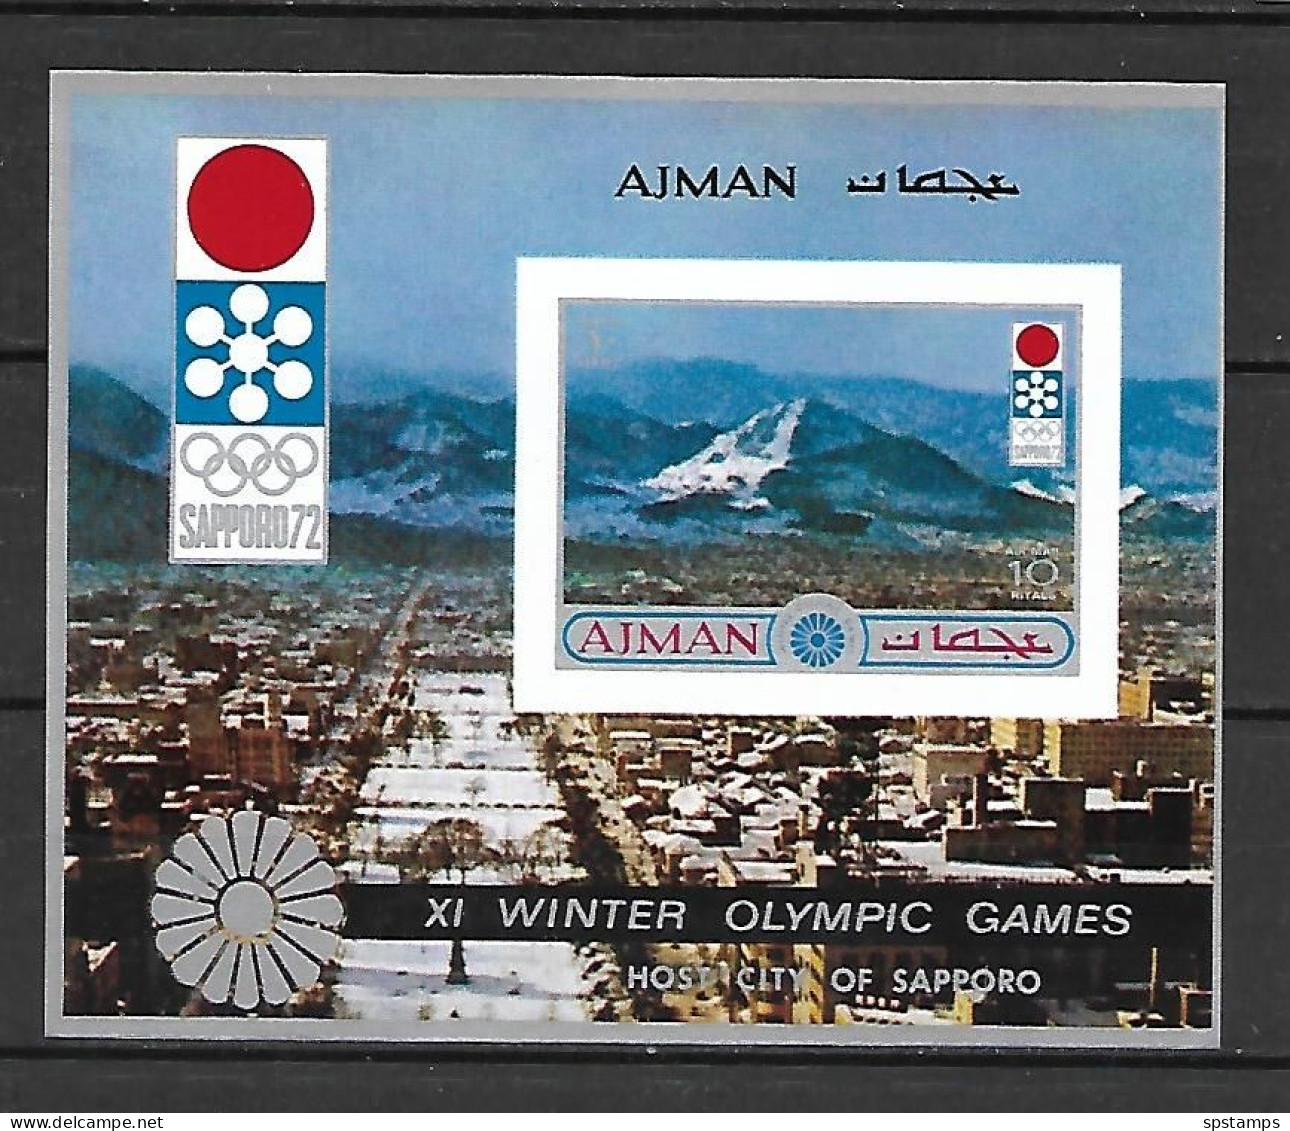 Ajman 1972 Winter Olympic Games SAPPORO IMPERFORATE MS MNH - Inverno1972: Sapporo